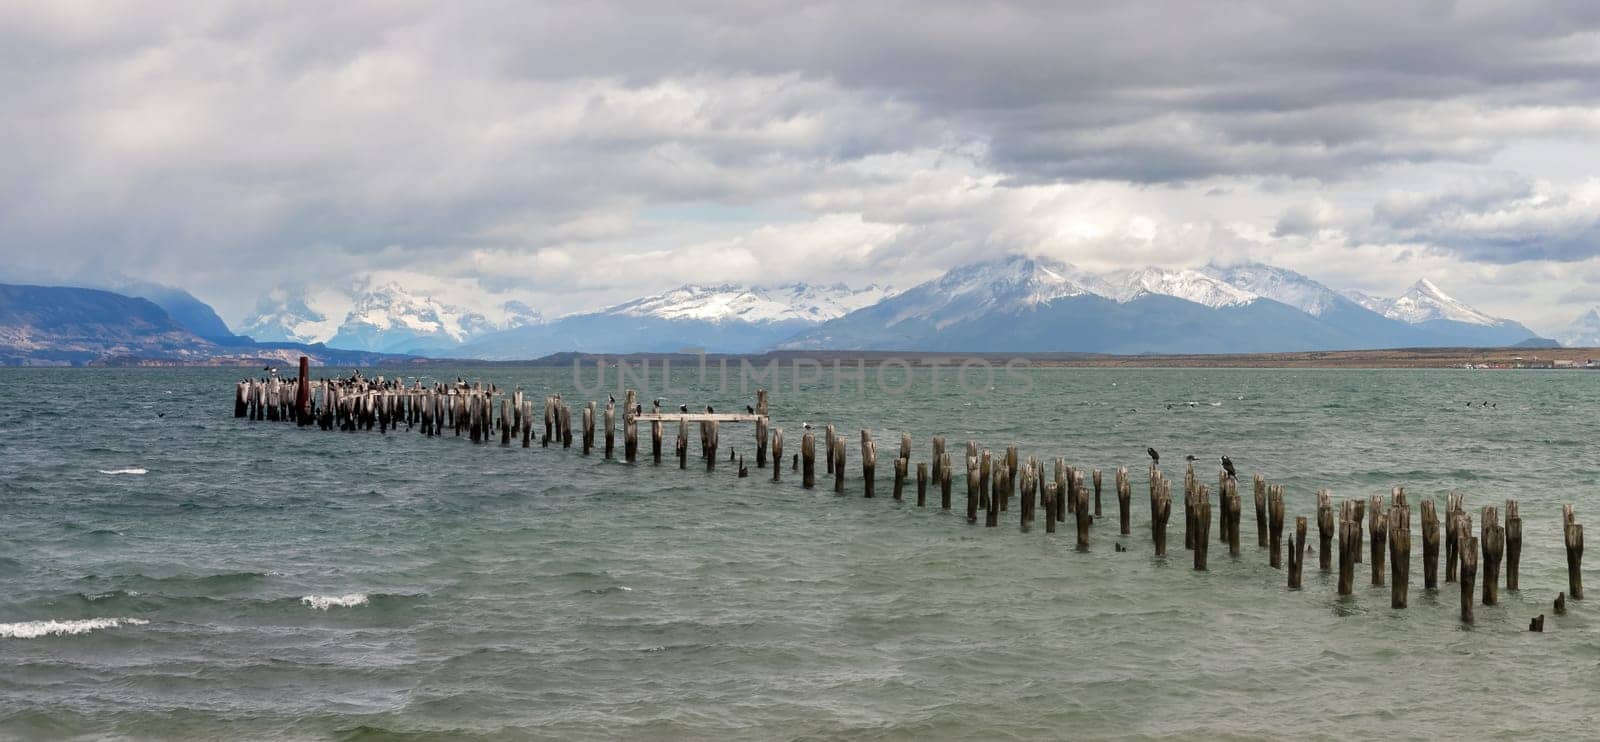 Birds on old posts under cloudy skies with snow-capped mountains.